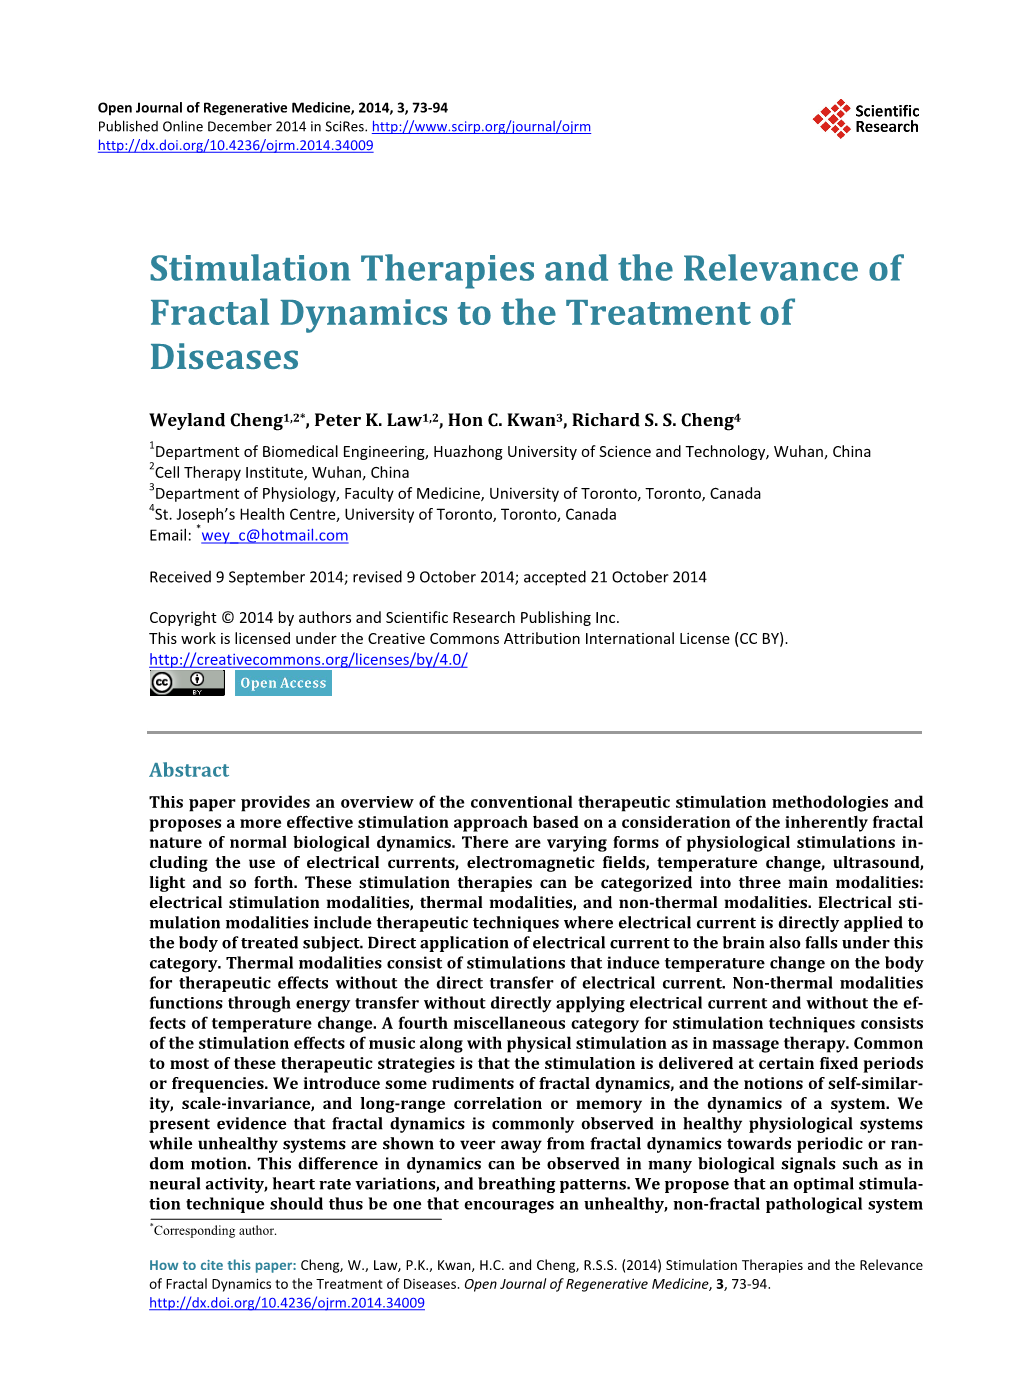 Stimulation Therapies and the Relevance of Fractal Dynamics to the Treatment of Diseases